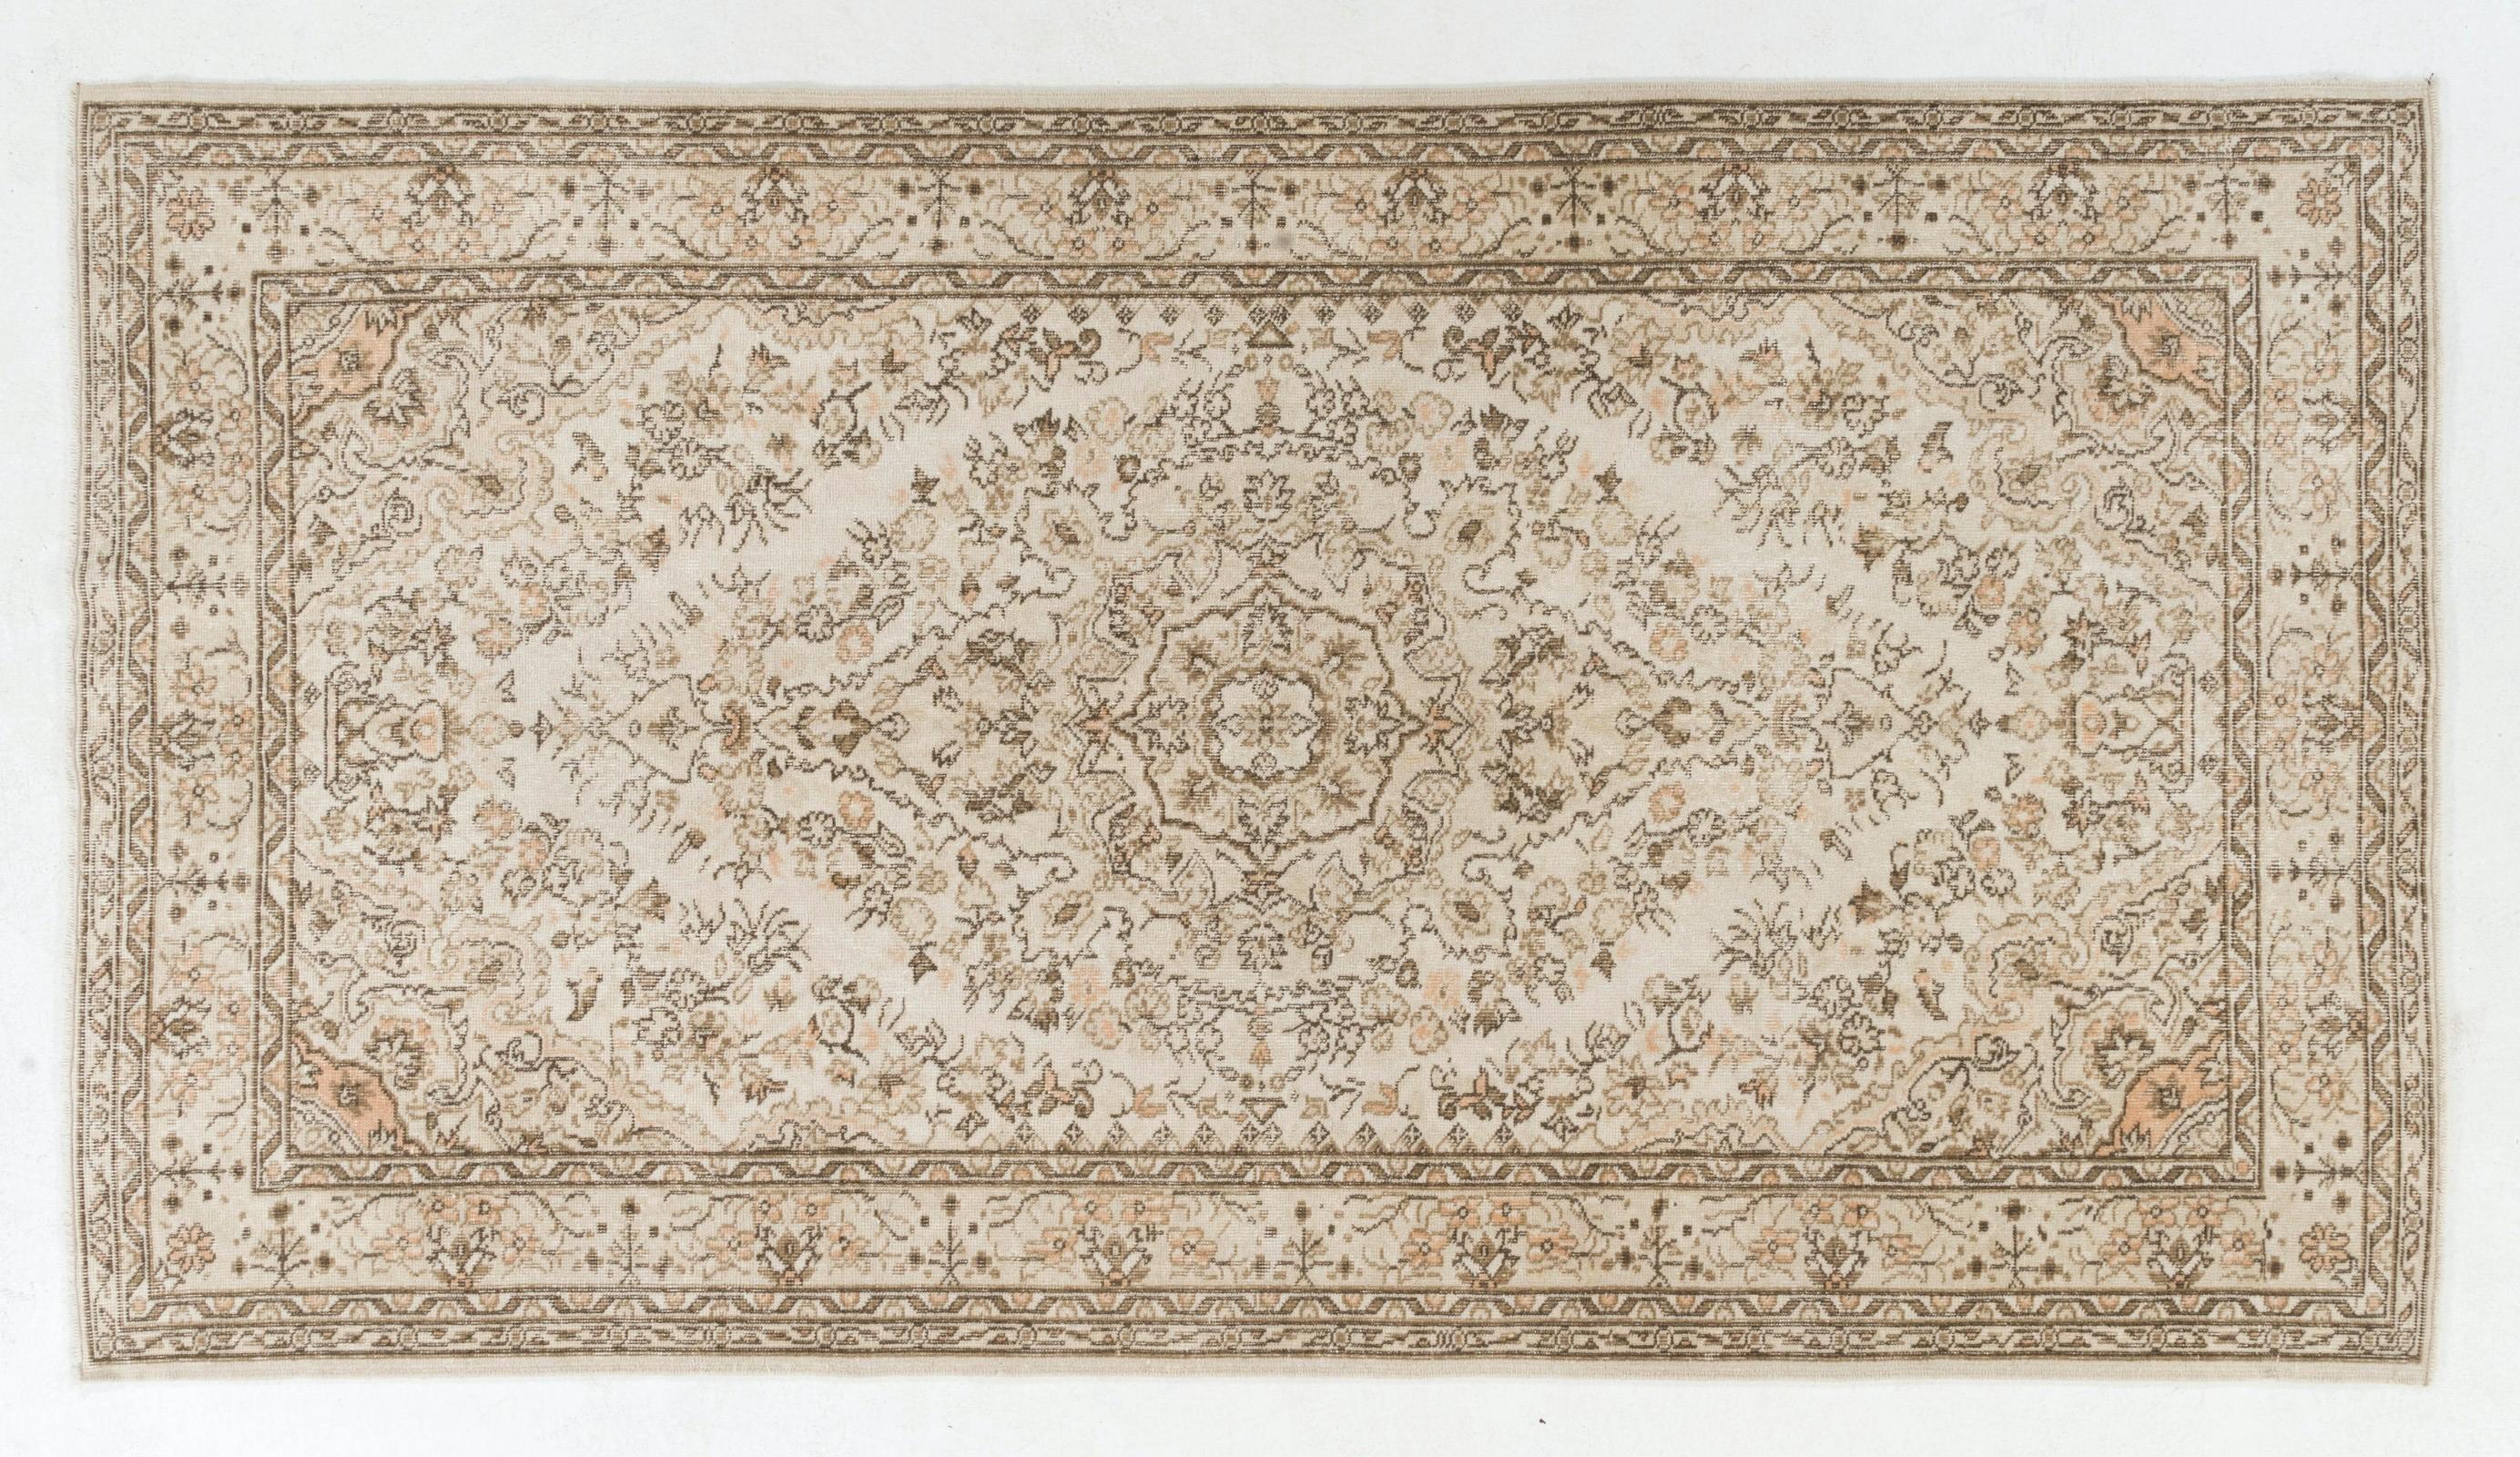 Cotton 5.7x10 Ft Vintage Hand-Knotted Floral Turkish Oushak Area Rug in Soft Colors For Sale